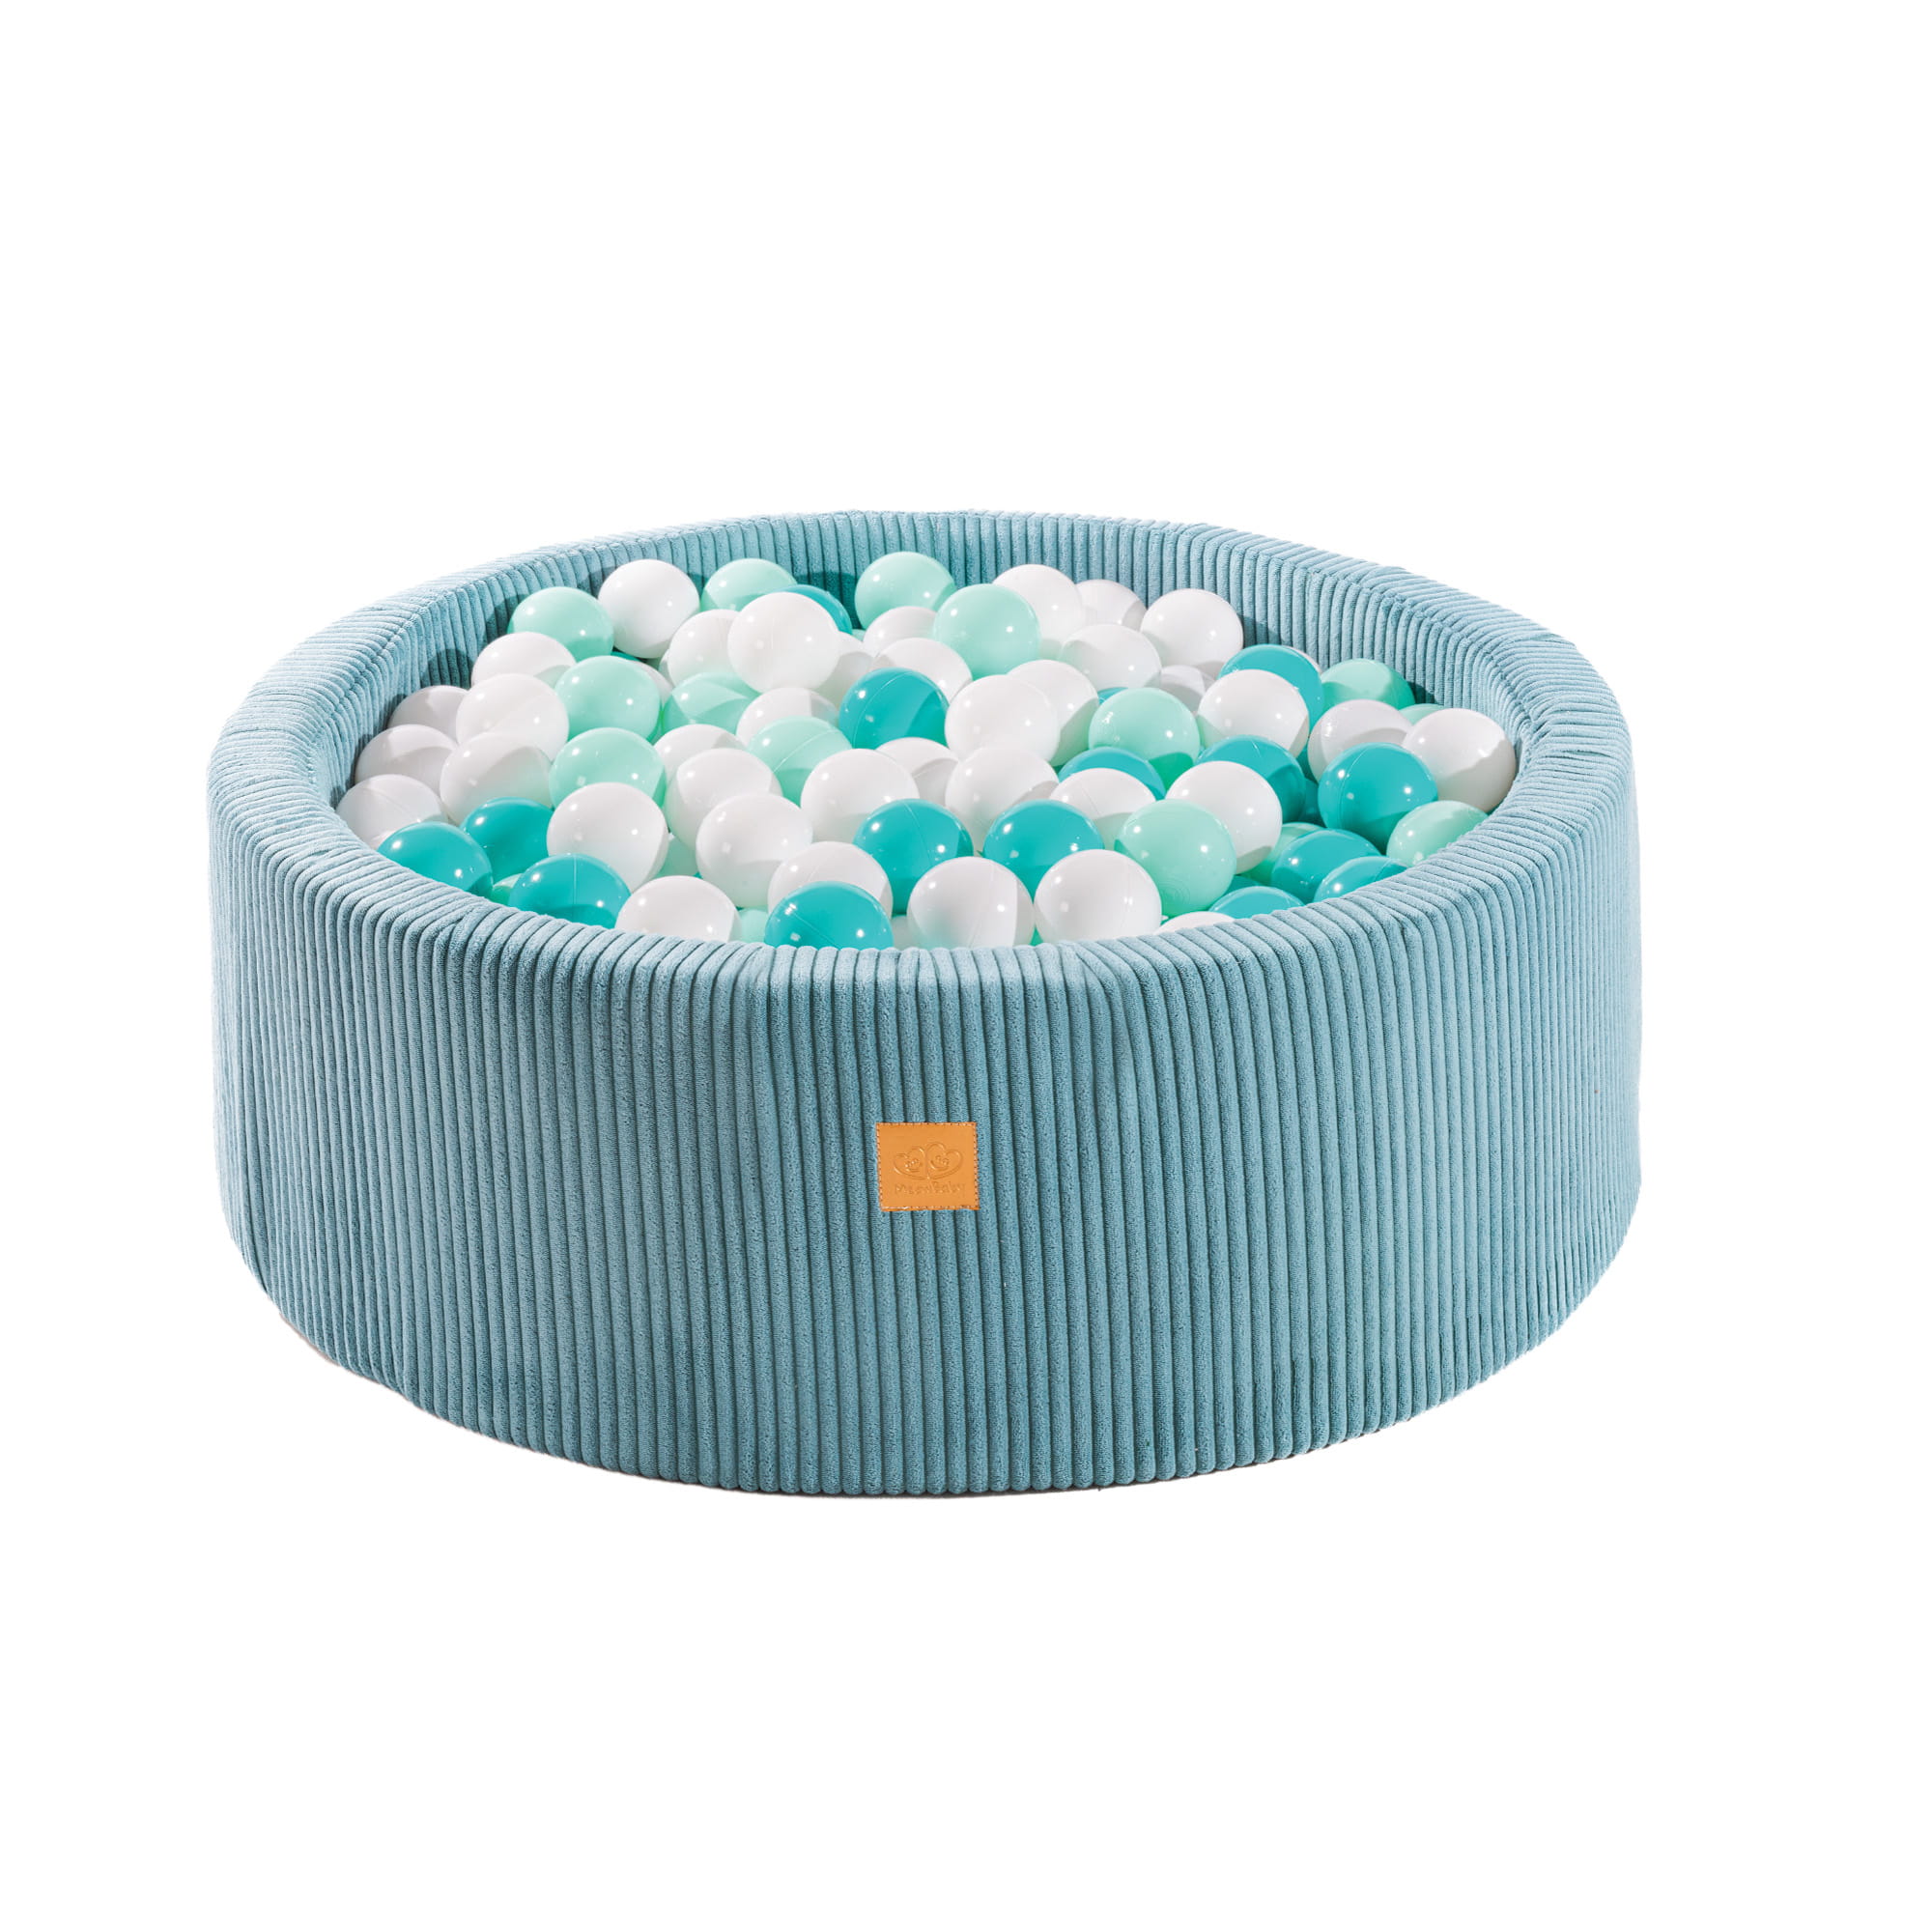 Piscina cu bile Boucle Corduroy Turquoise Meow Baby – White/Mint/Turquoise